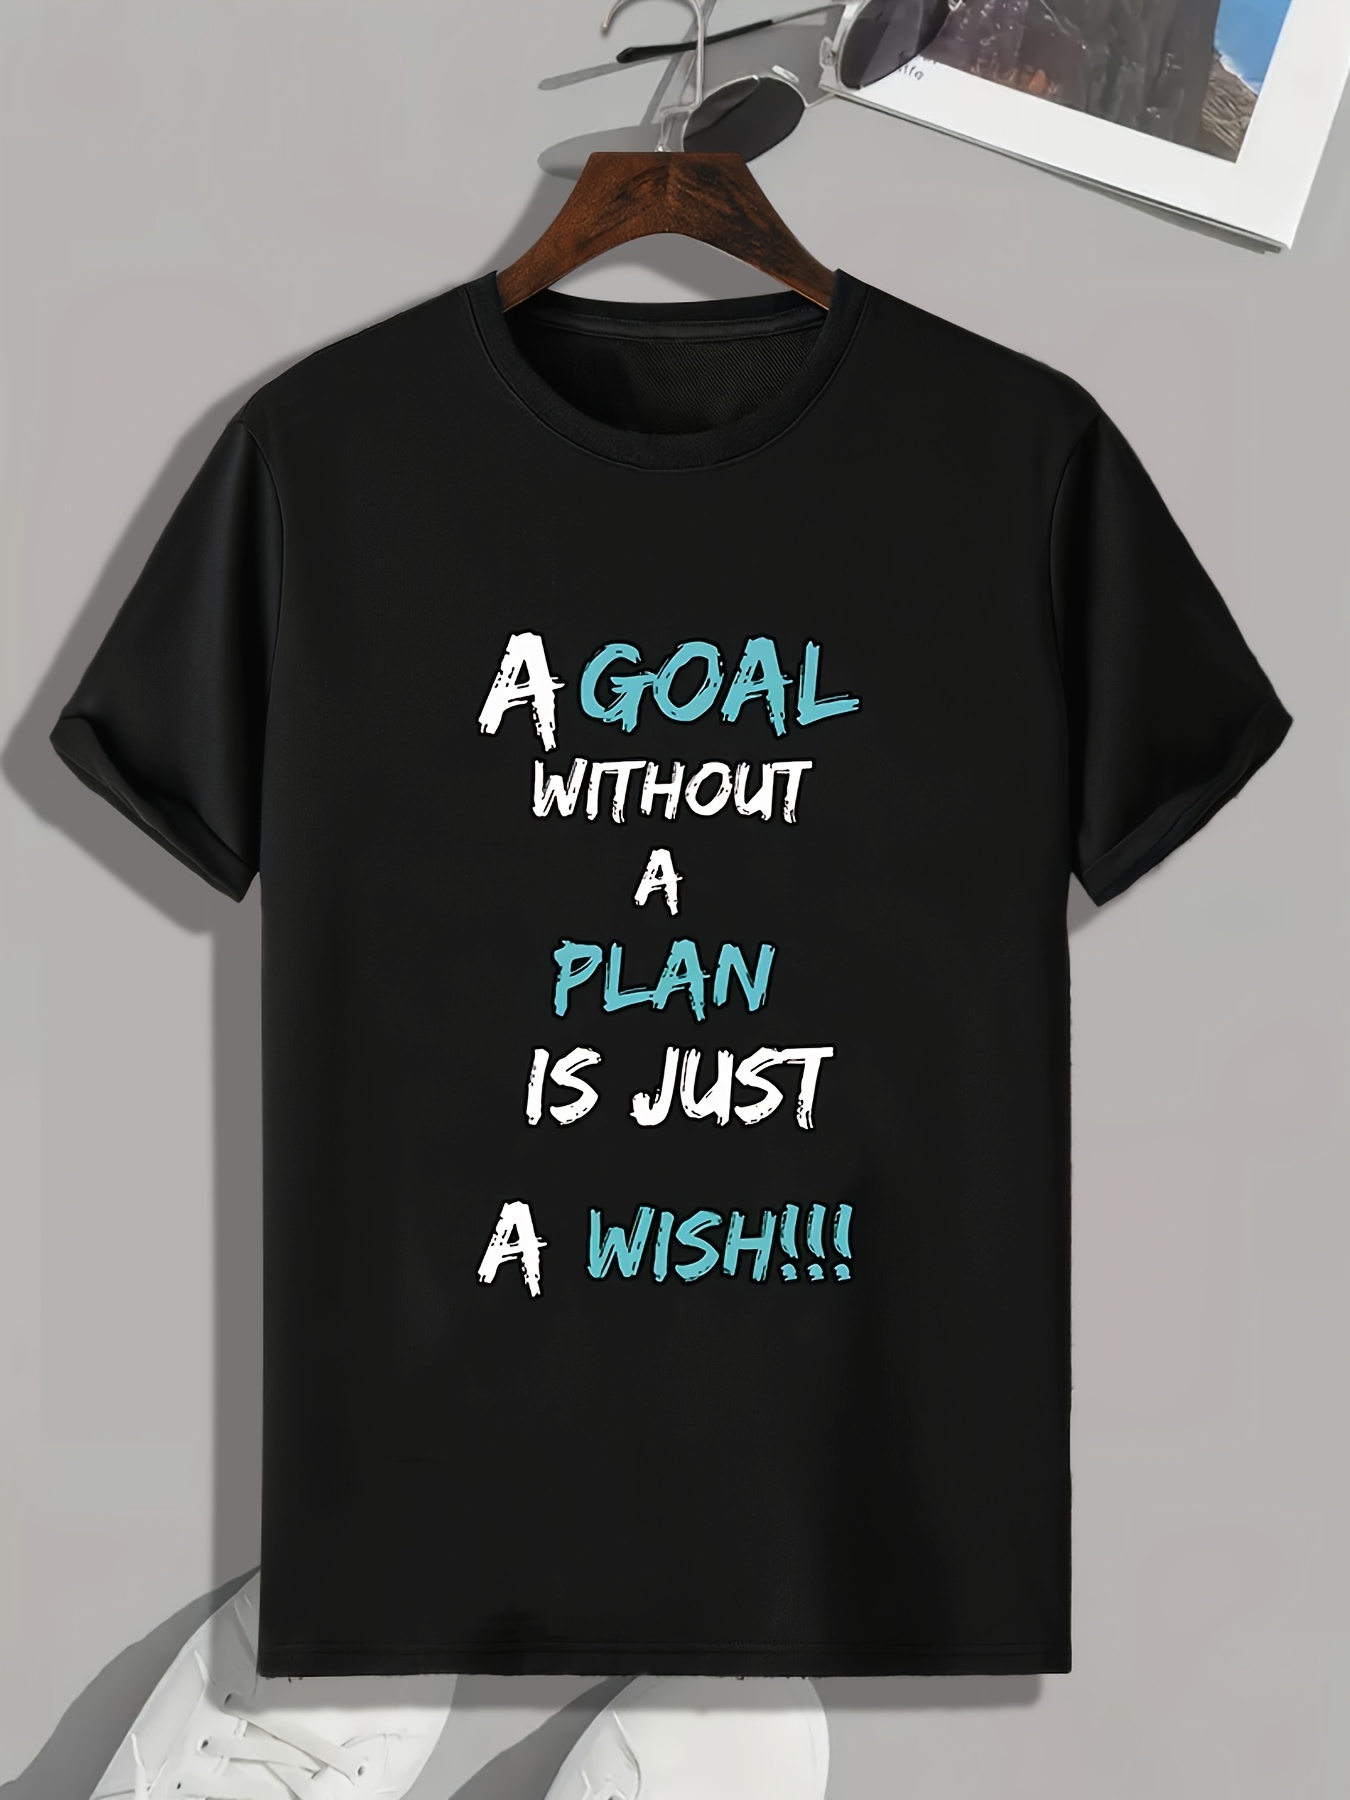 Men's T-shirt Printed Design - A Goal Without A Plan Is Just A Wish